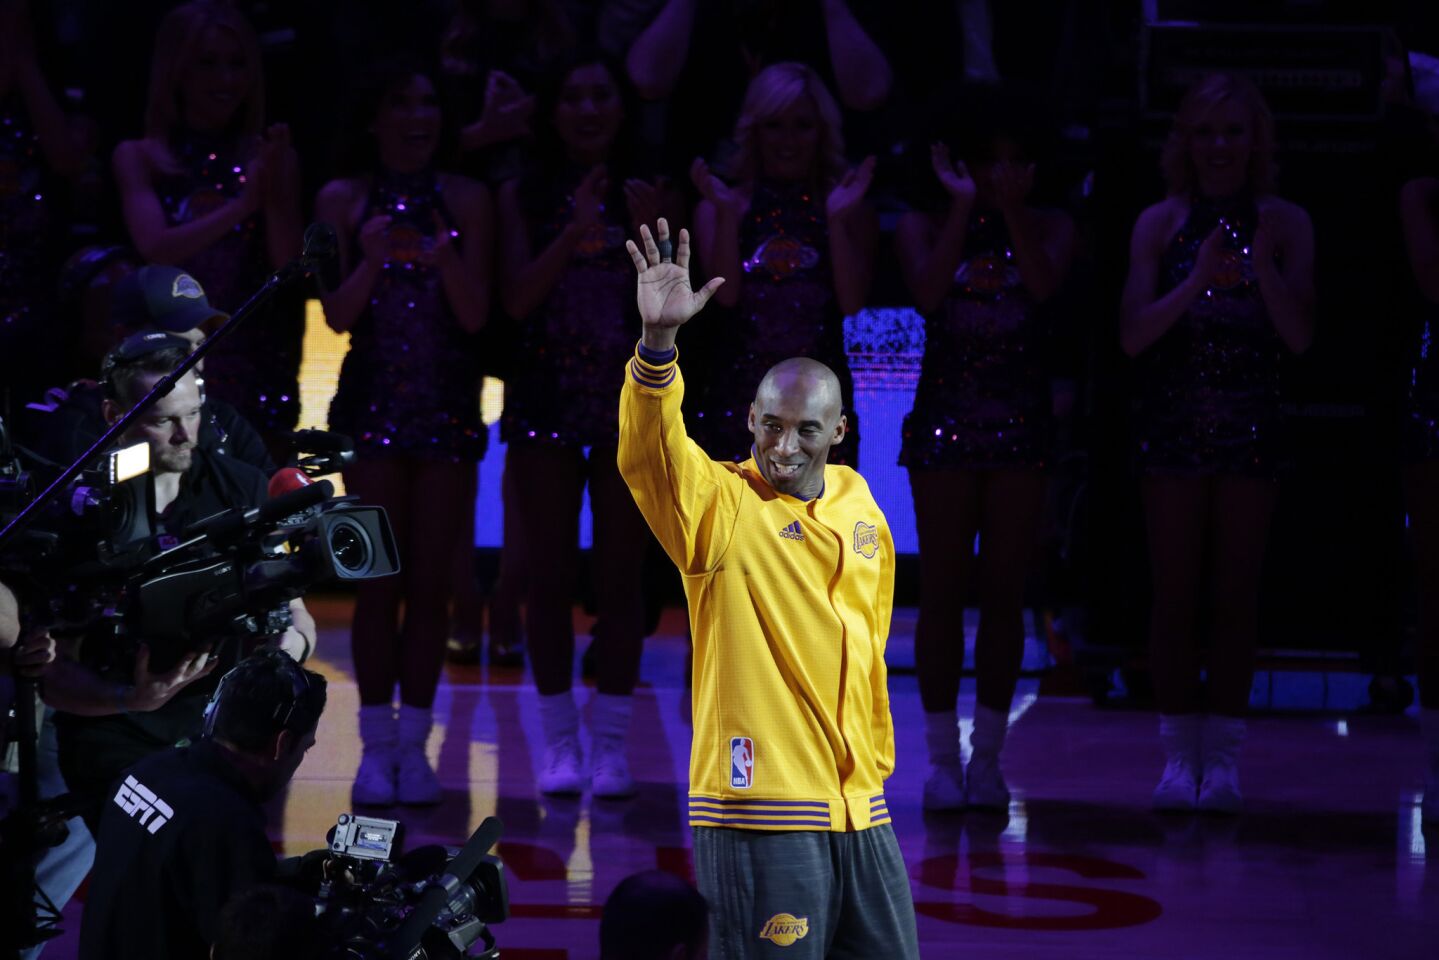 Kobe Bryant acknowledges the Staples Center crowd during a pregame ceremony.